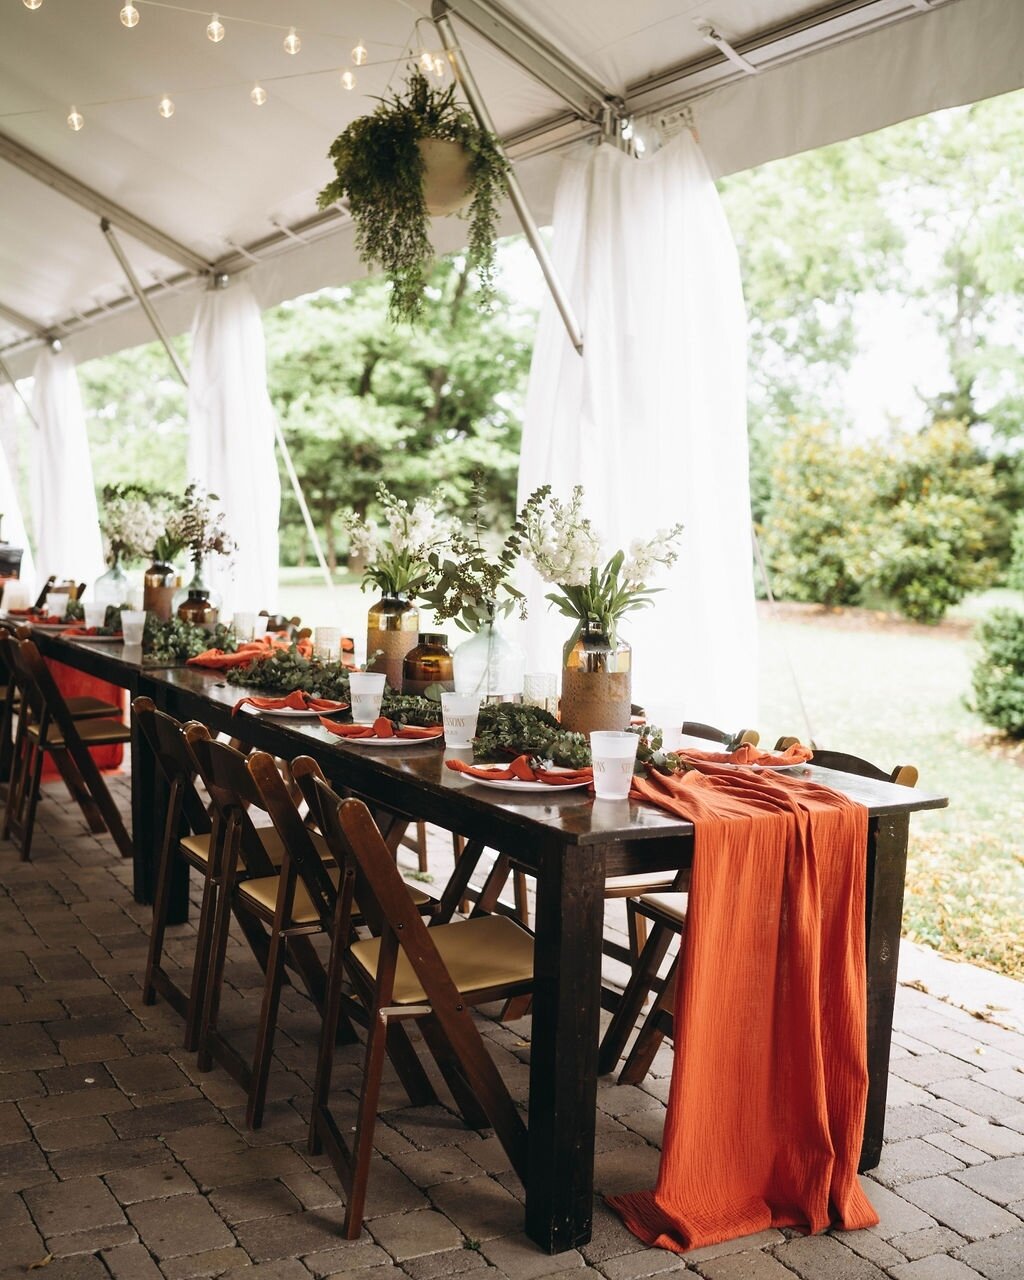 Fully obsessed with this tablescape and color scheme for a reception on our patio! ⁠
.⁠
.⁠
.⁠
⁠
📸: @jessicasteddomphotography⁠
#weddings #ravenswoodweddings #ido #shesaidyes #ravenswoodmansionwedding #ravenswoodmansionmoments #nashvillevenue #nashvi